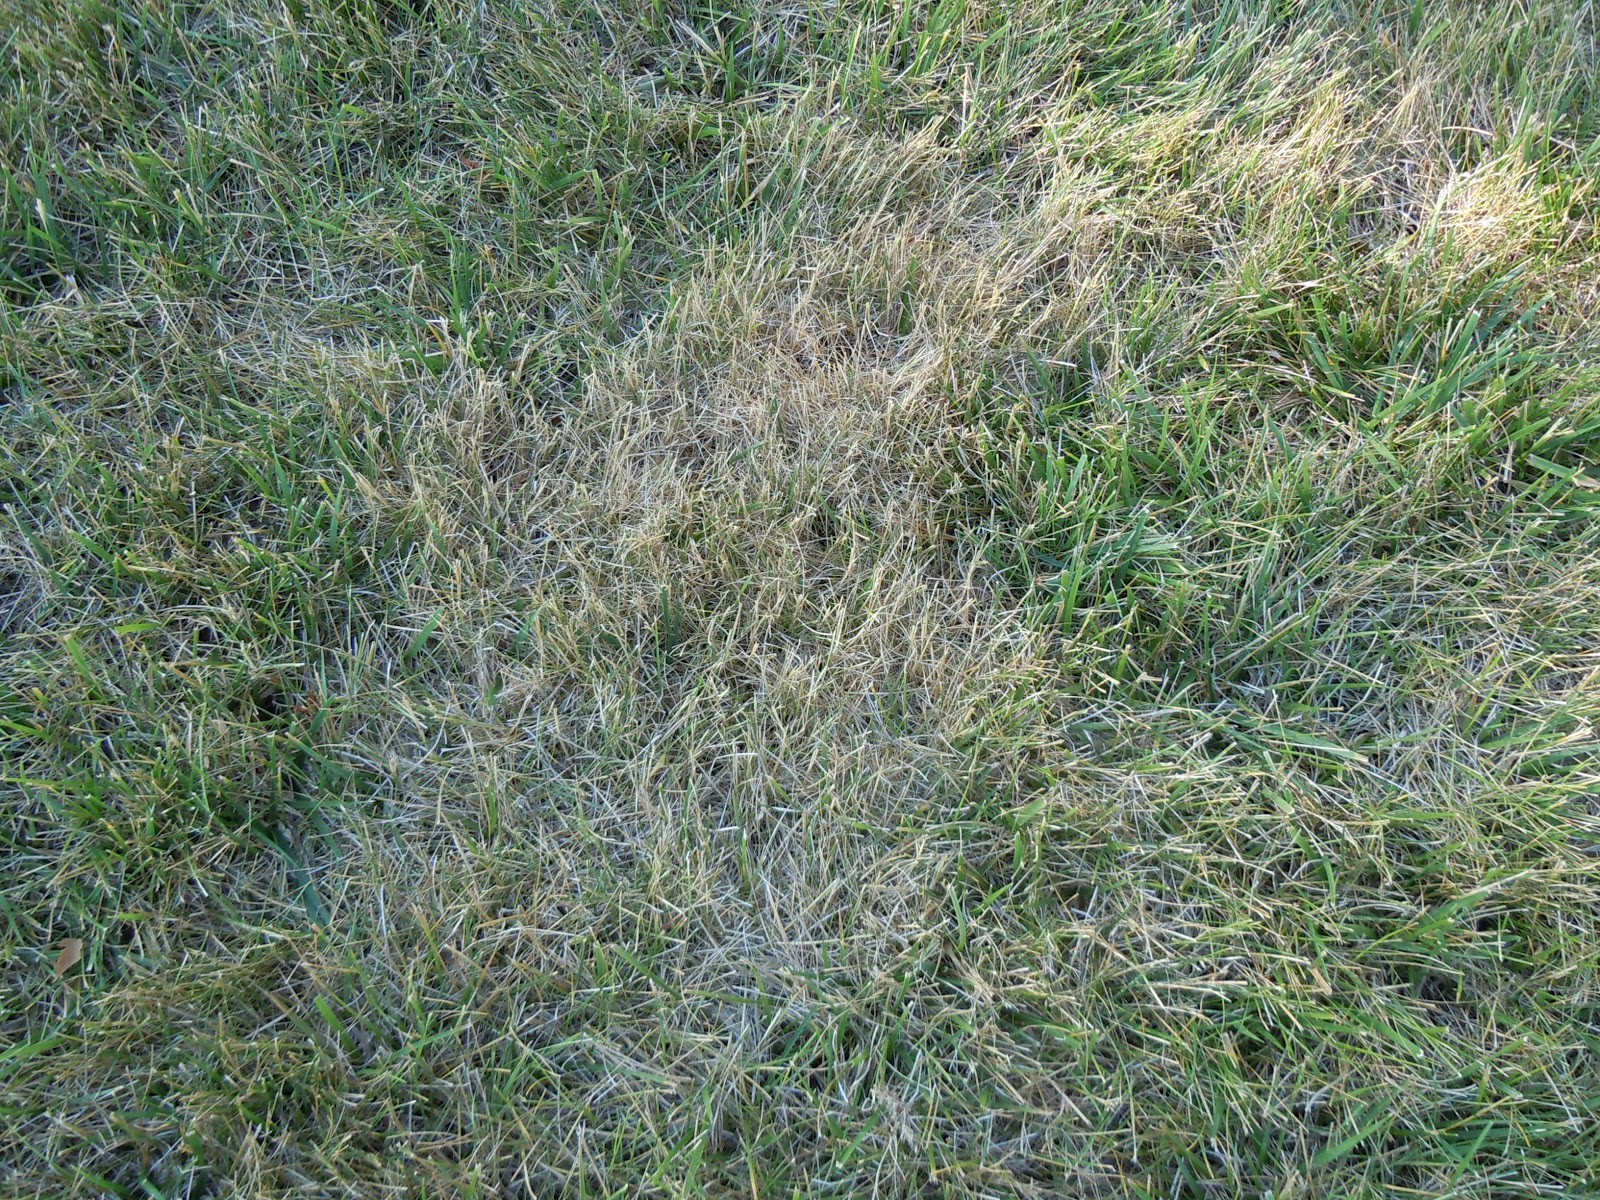 Purdue Turf Tips: My Lawn is Brown and Crunchy… Is it Dead? What do ...